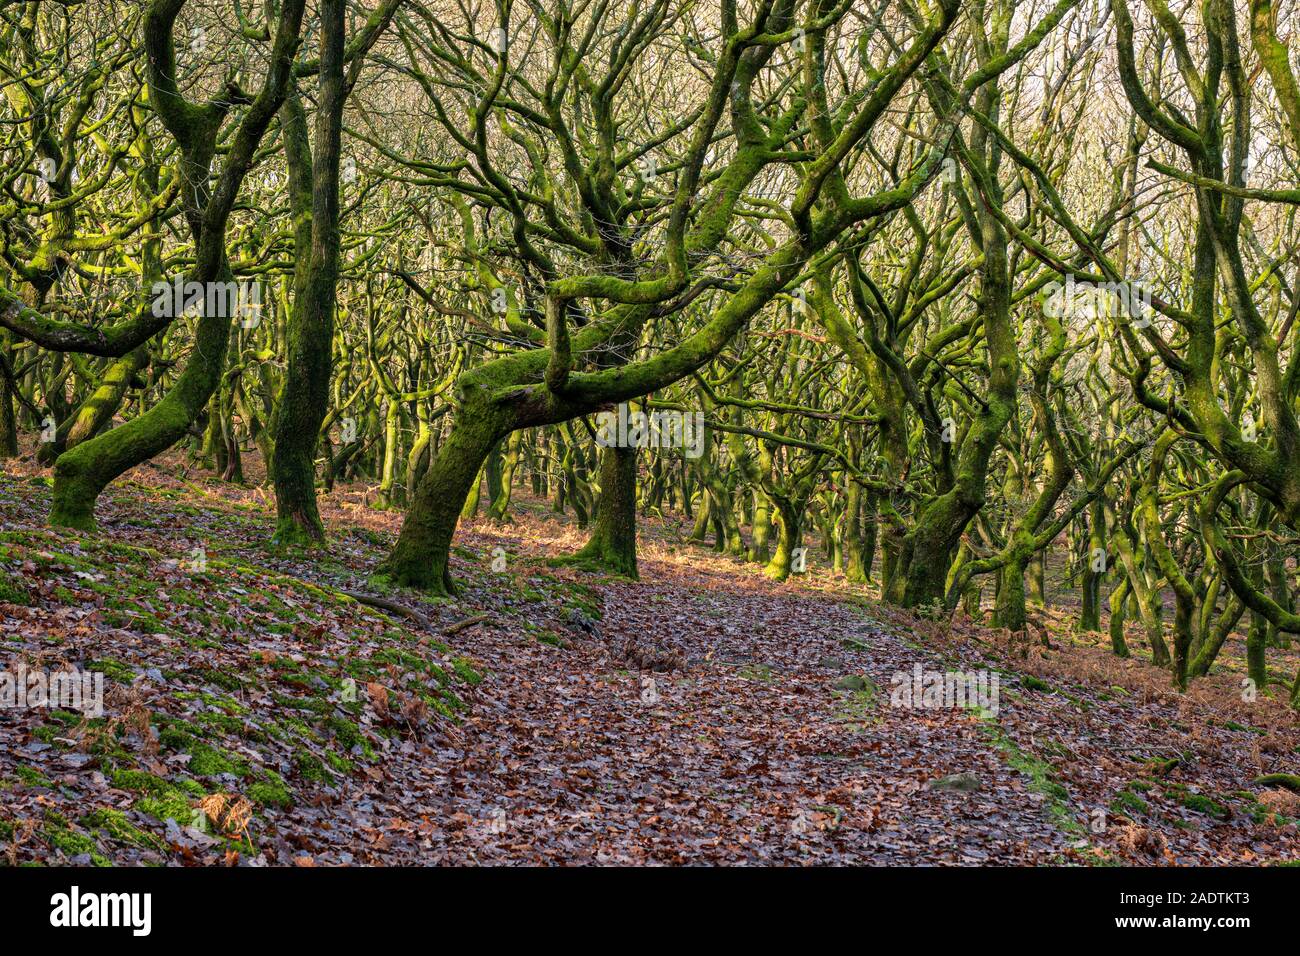 Twisted trees growing on a hillside in Wales. Stock Photo